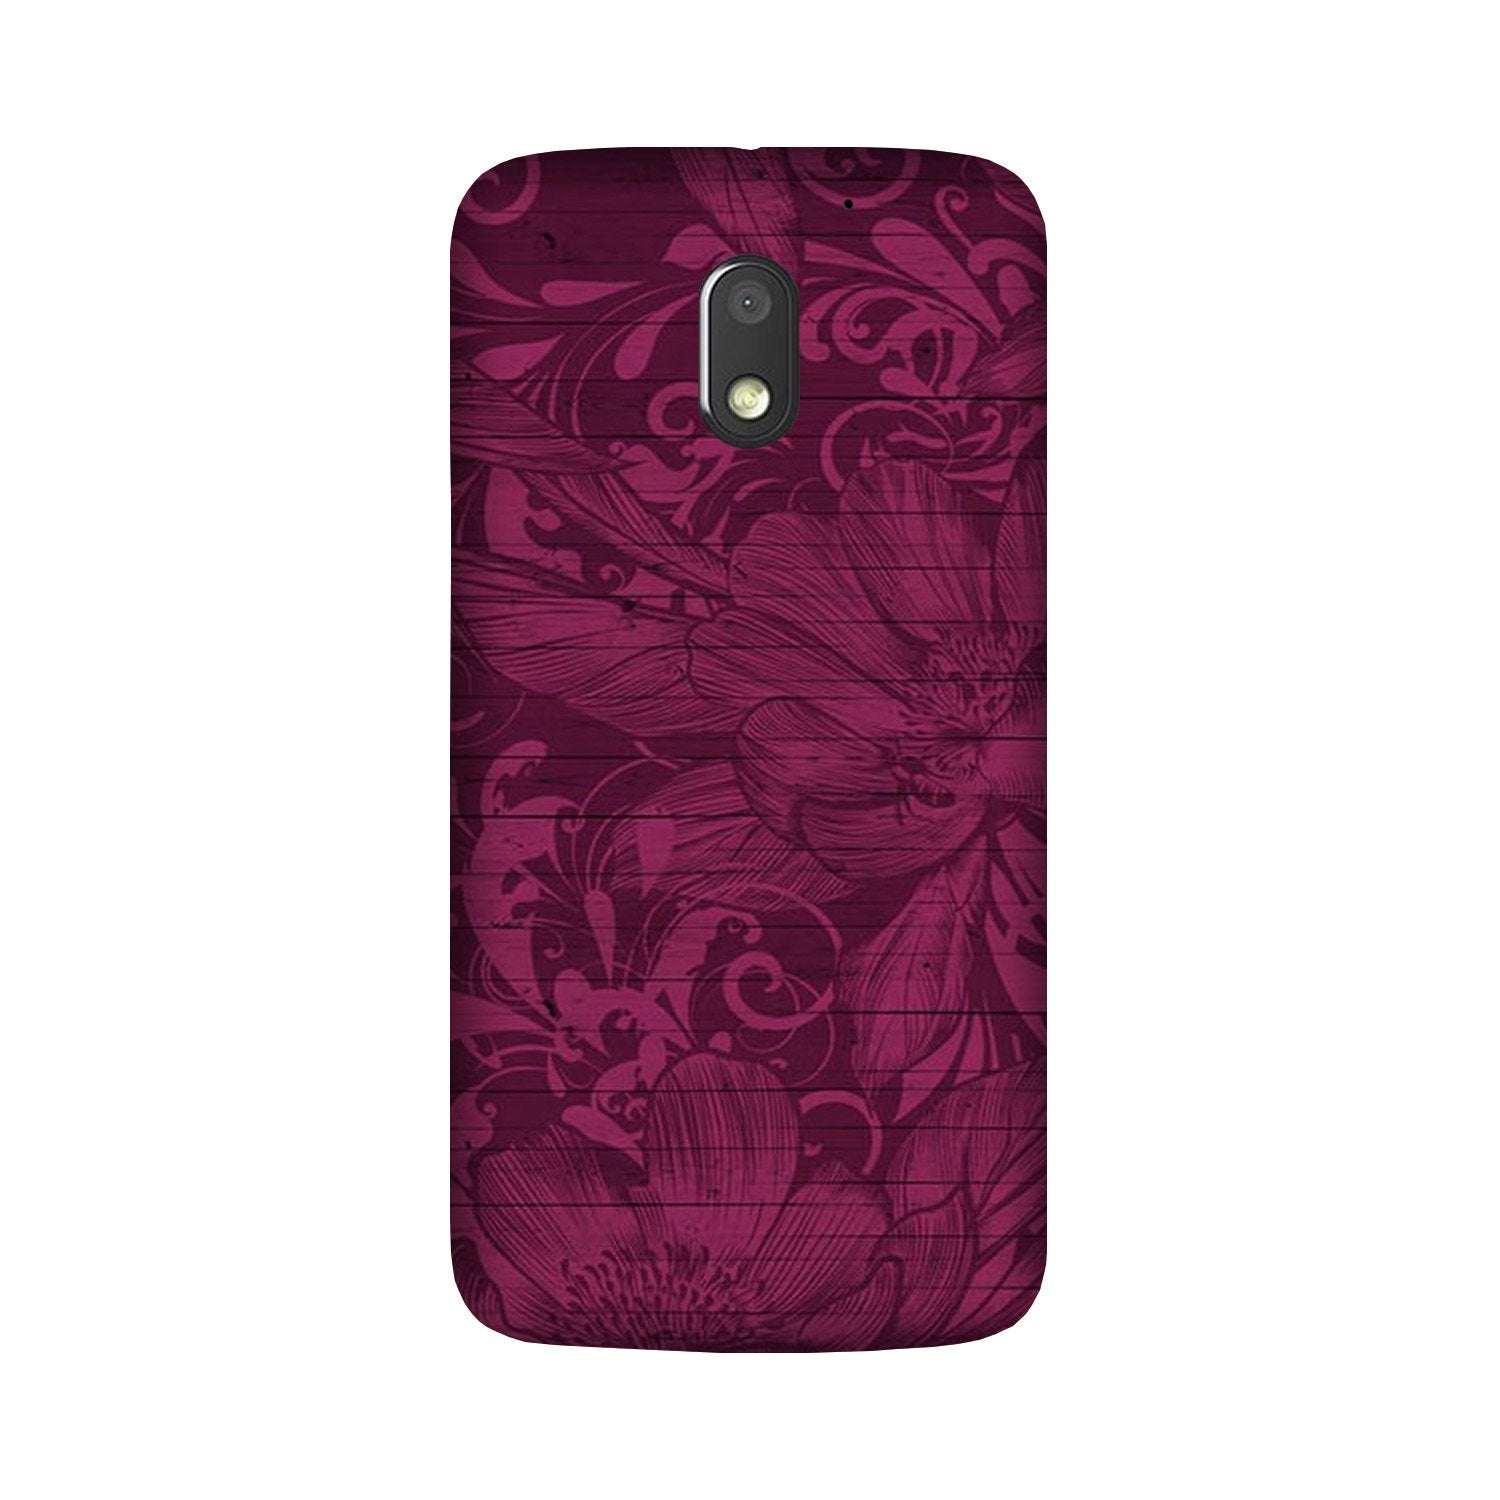 Purple Backround Case for Moto G4 Play